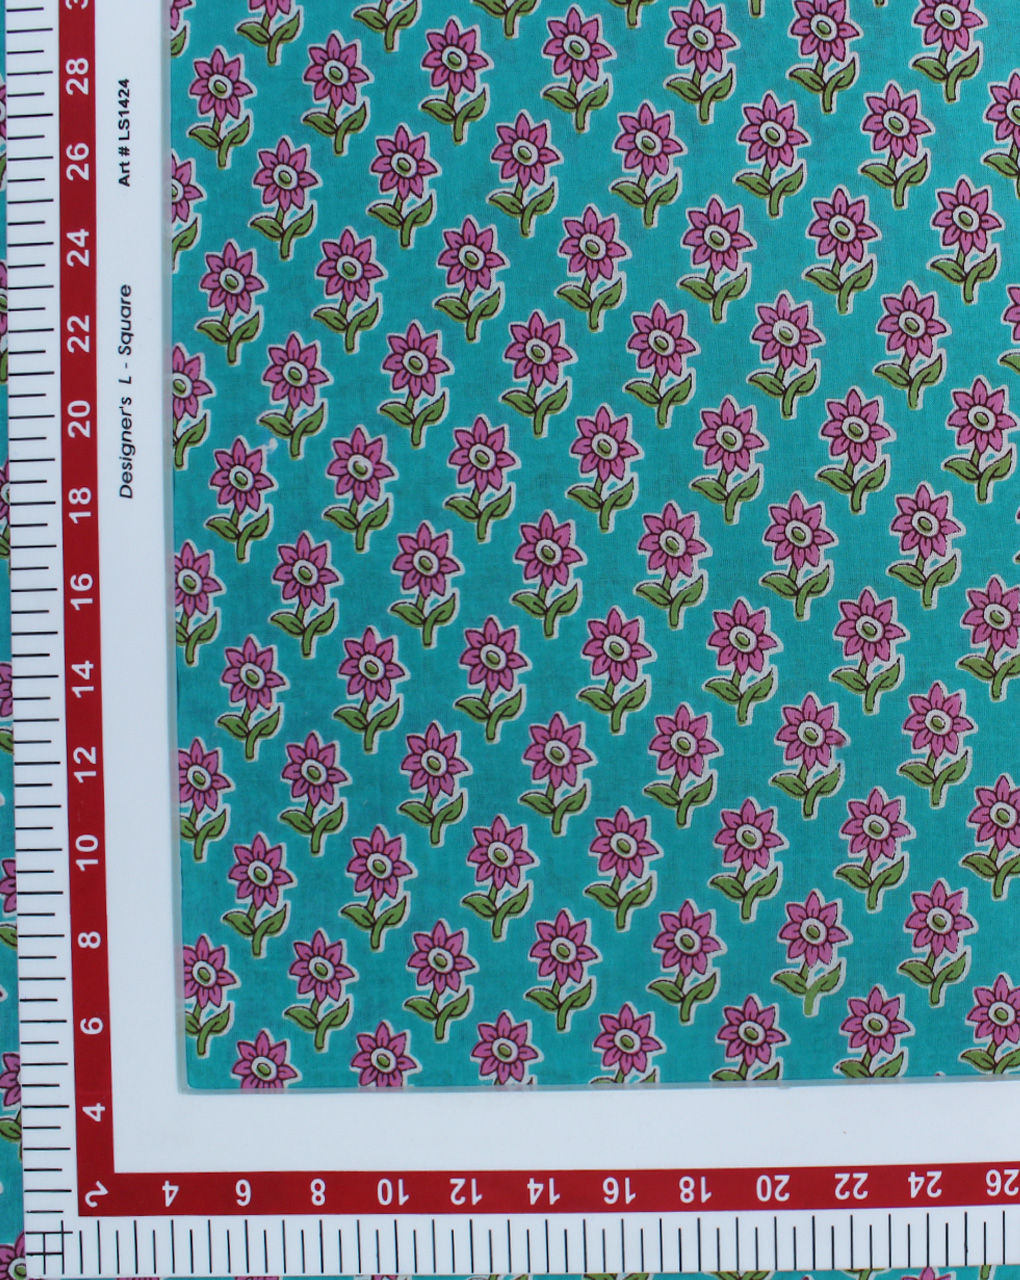 Green Floral Design Printed Cotton Fabric